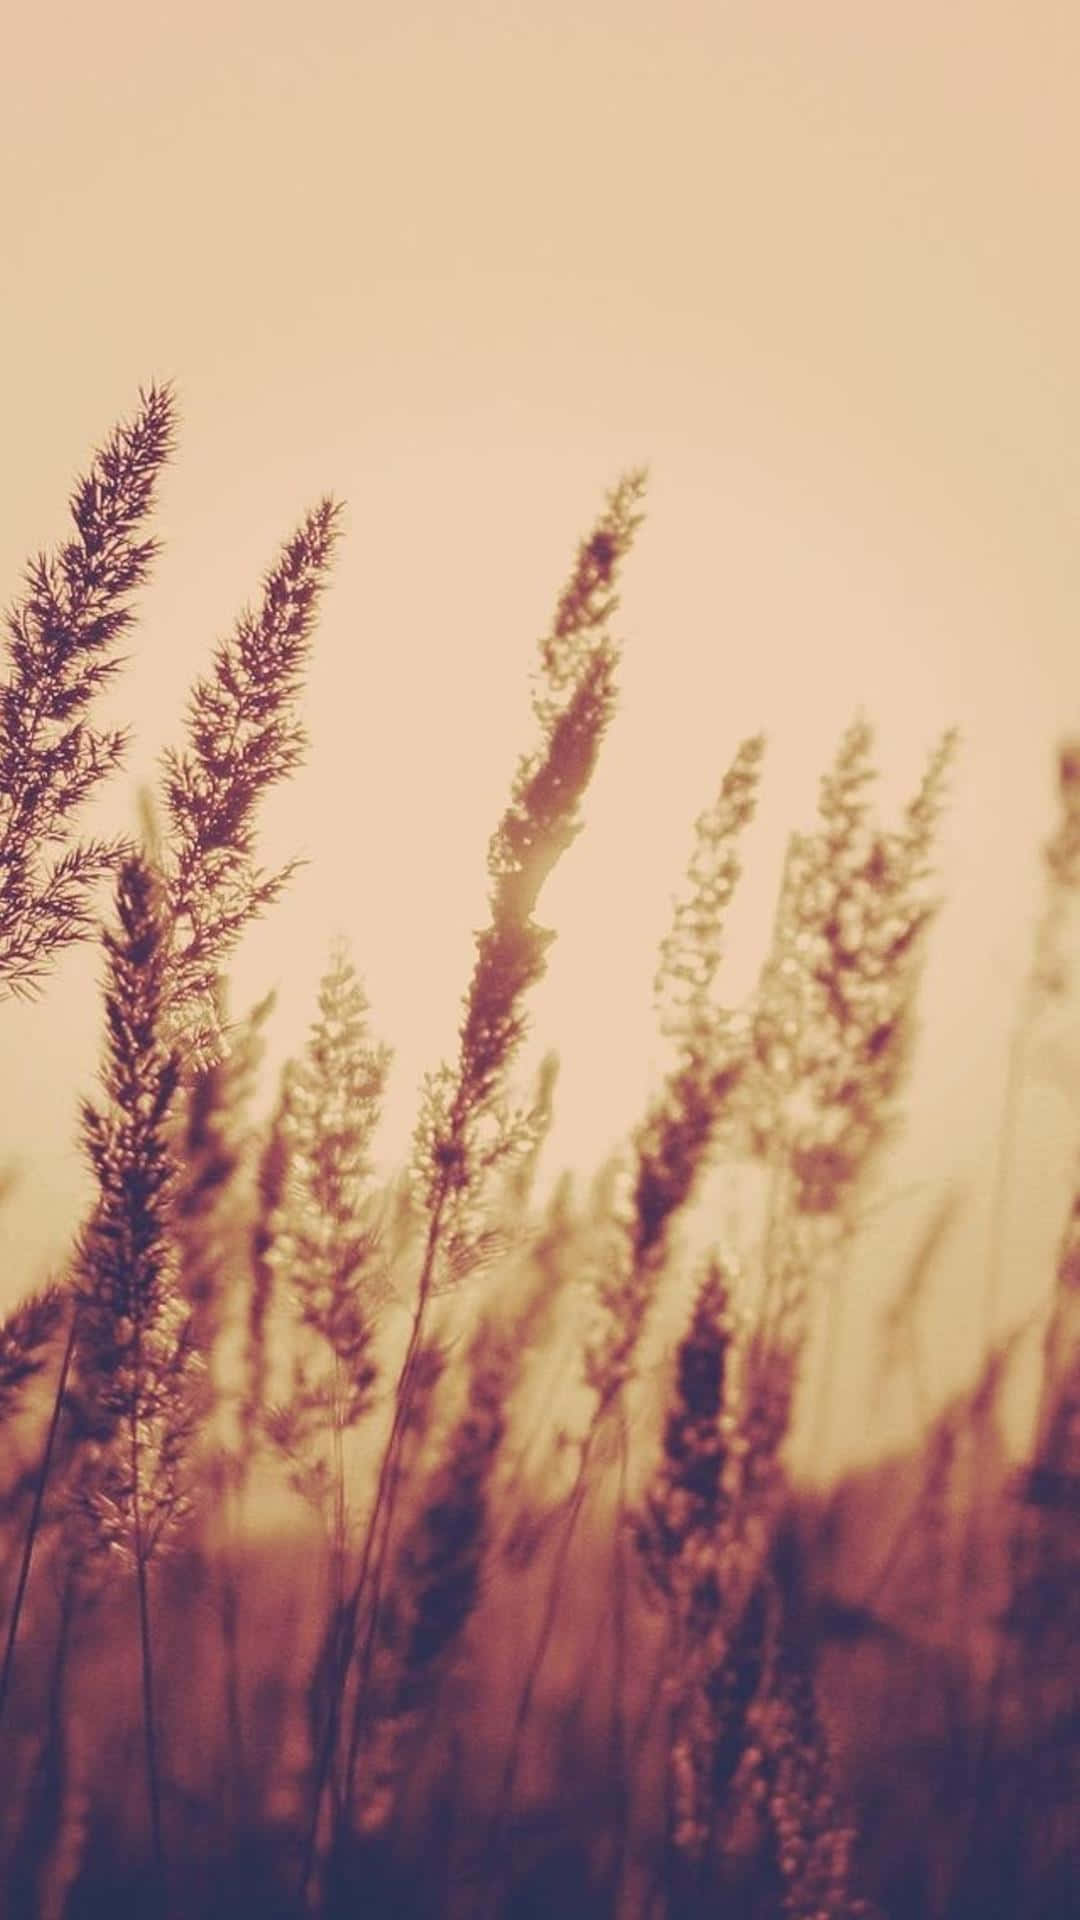 Vintage Aesthetic Plant in a Rustic Background Wallpaper